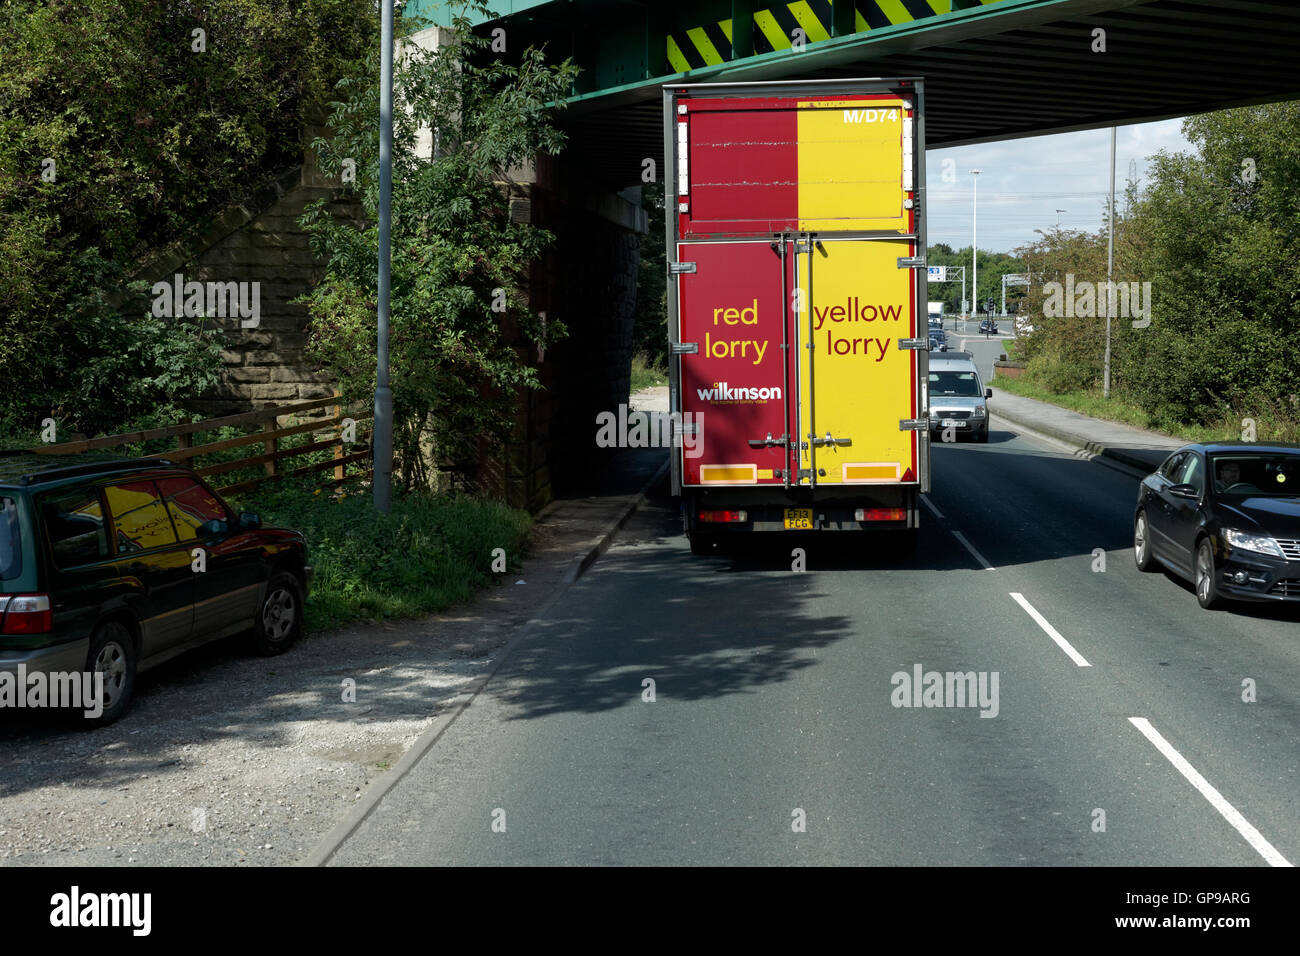 red,yellow,lorry,red lorry yellow lorry,driving under low bridge,pontefract,yorkshire,england,united kingdom Stock Photo